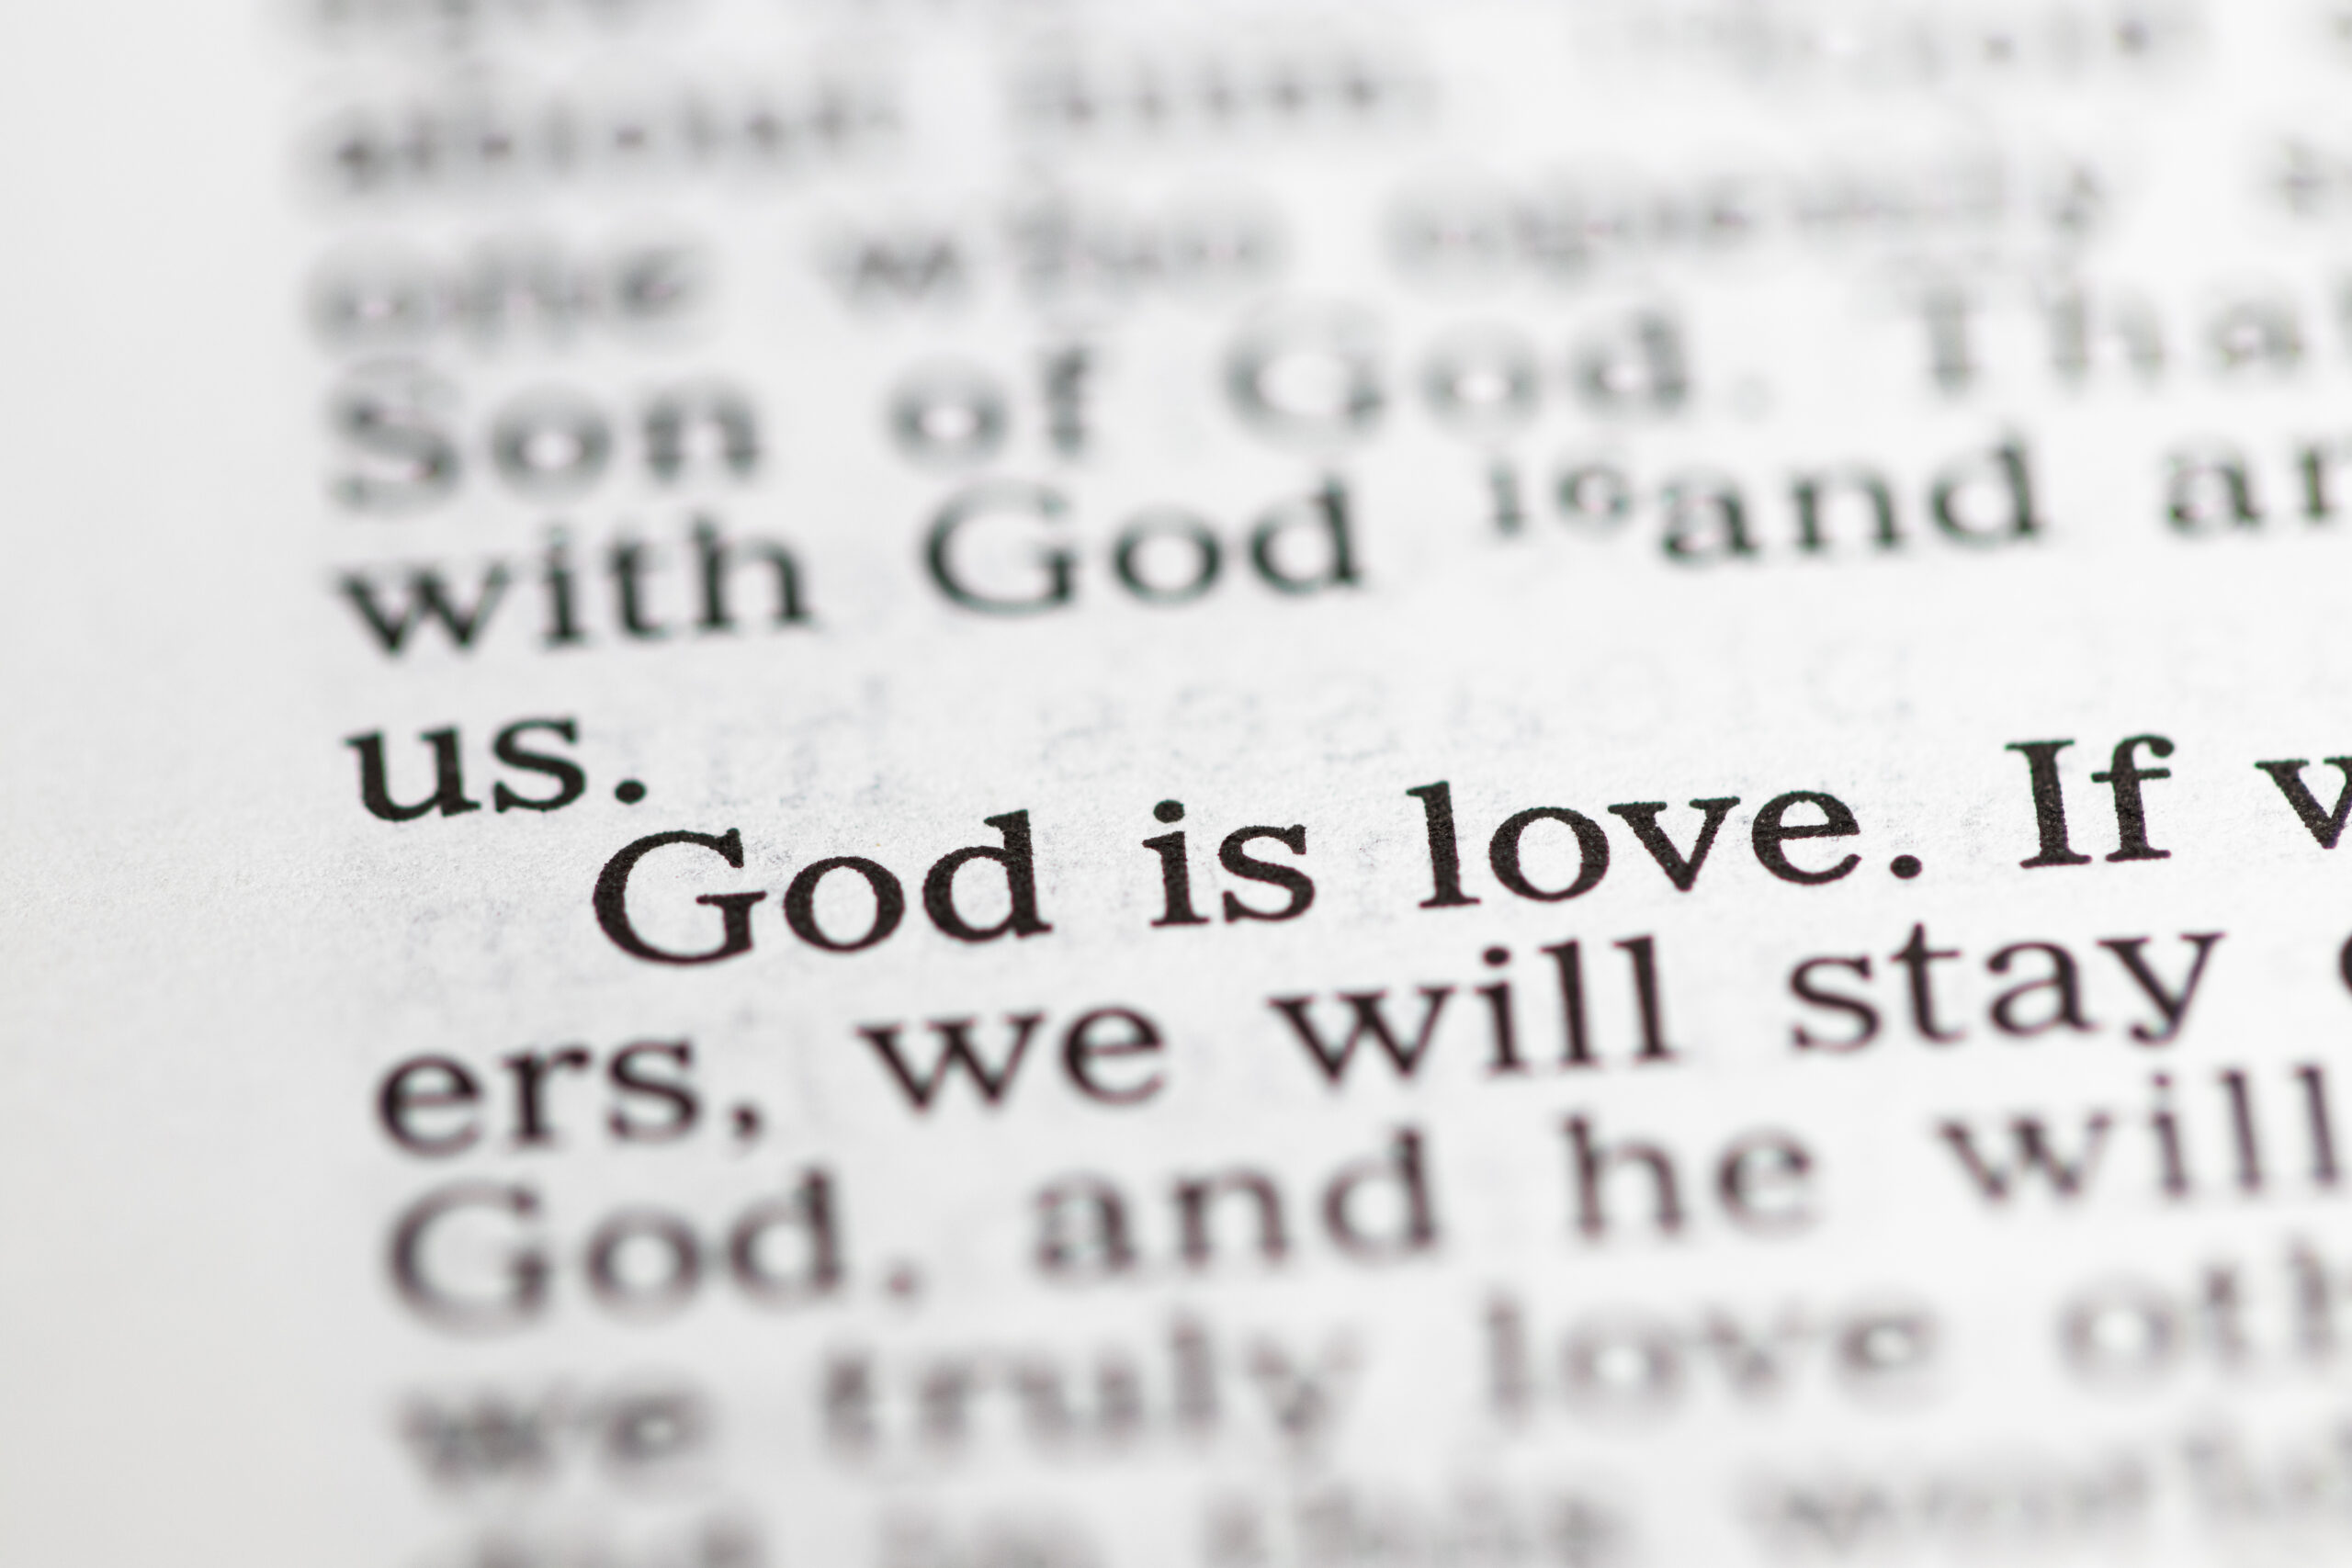 Biblical text reading: "God is love."